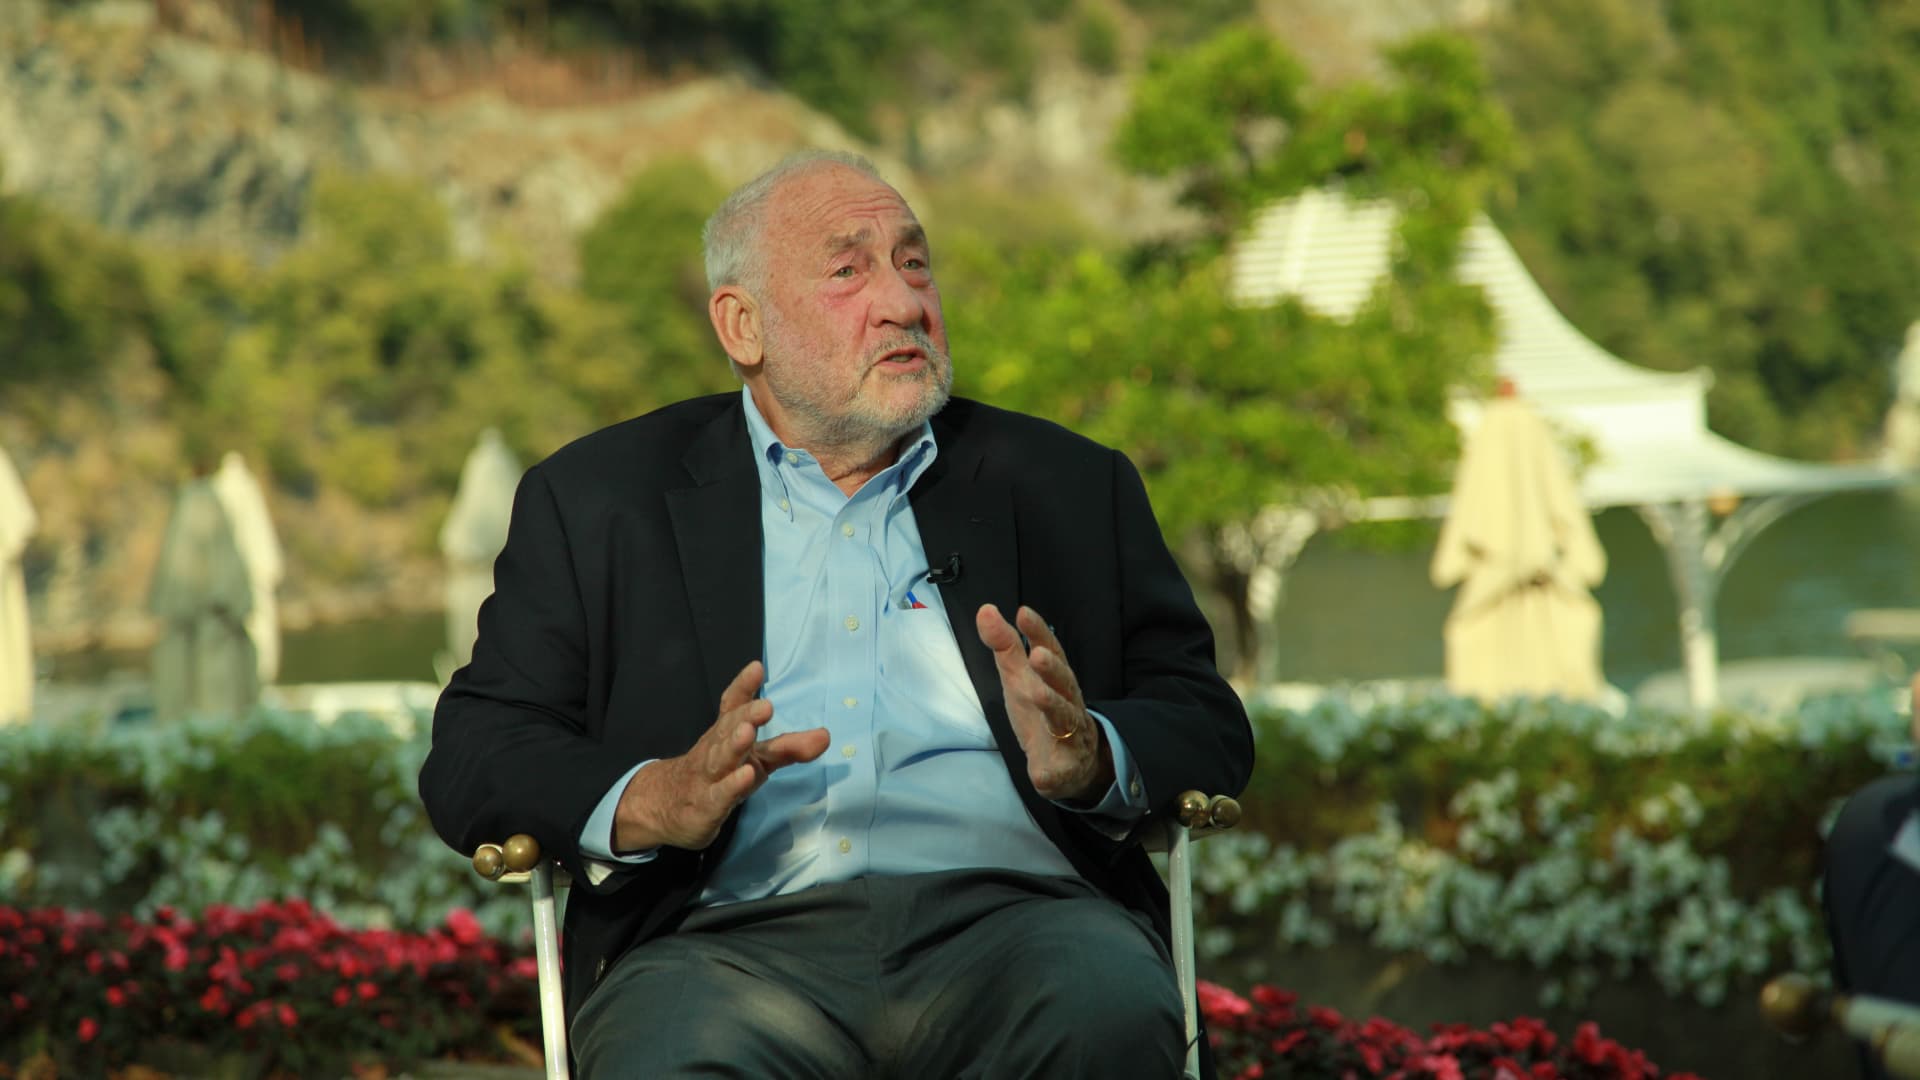 Joseph Stiglitz thinks further Fed rate hikes could make inflation worse